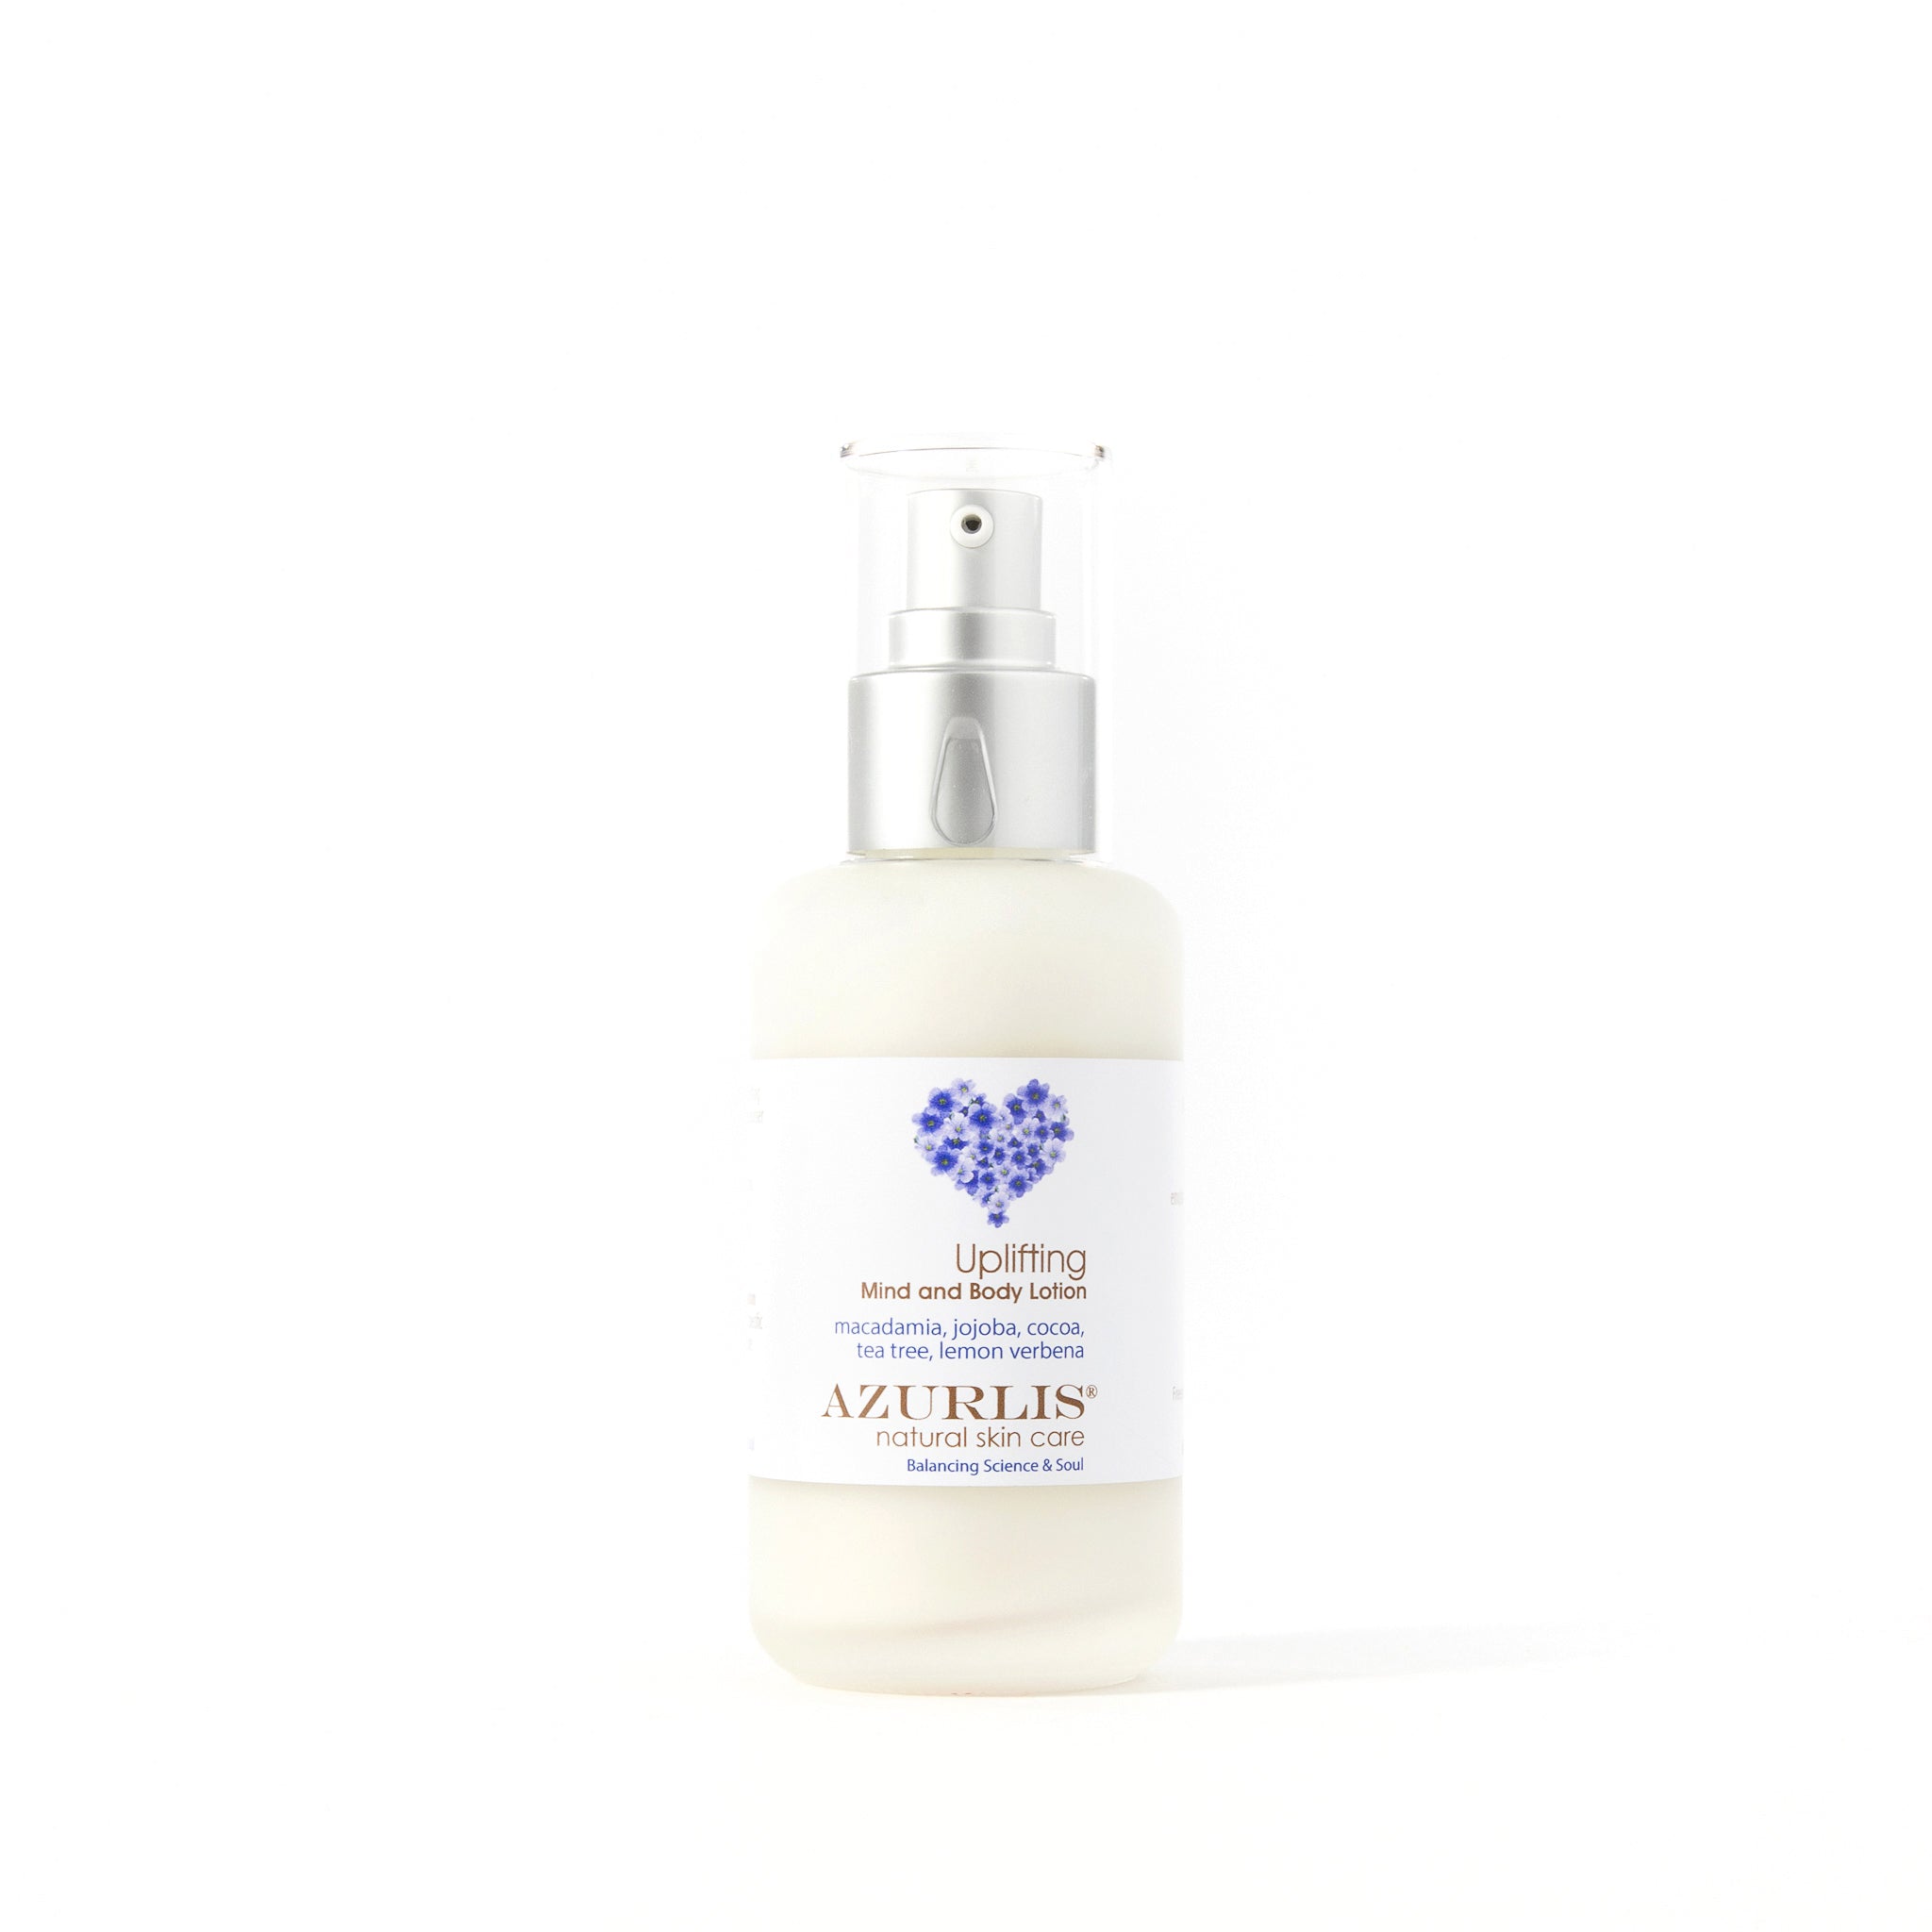 Azurlis™ Uplifting Mind &amp; Body Lotion 100ml provides a wonderful medium to protect the skin all over your body, including dry, hard to soften skin and fine abrasions, especially on your hands and feet.  The softening and emollient properties of macadamia nut and jojoba oils are ideal to make your skin feel wonderfully moisturised and soft. NZ tea tree and lemon verbena essential oils are also shielding due to their mild antiseptic properties.